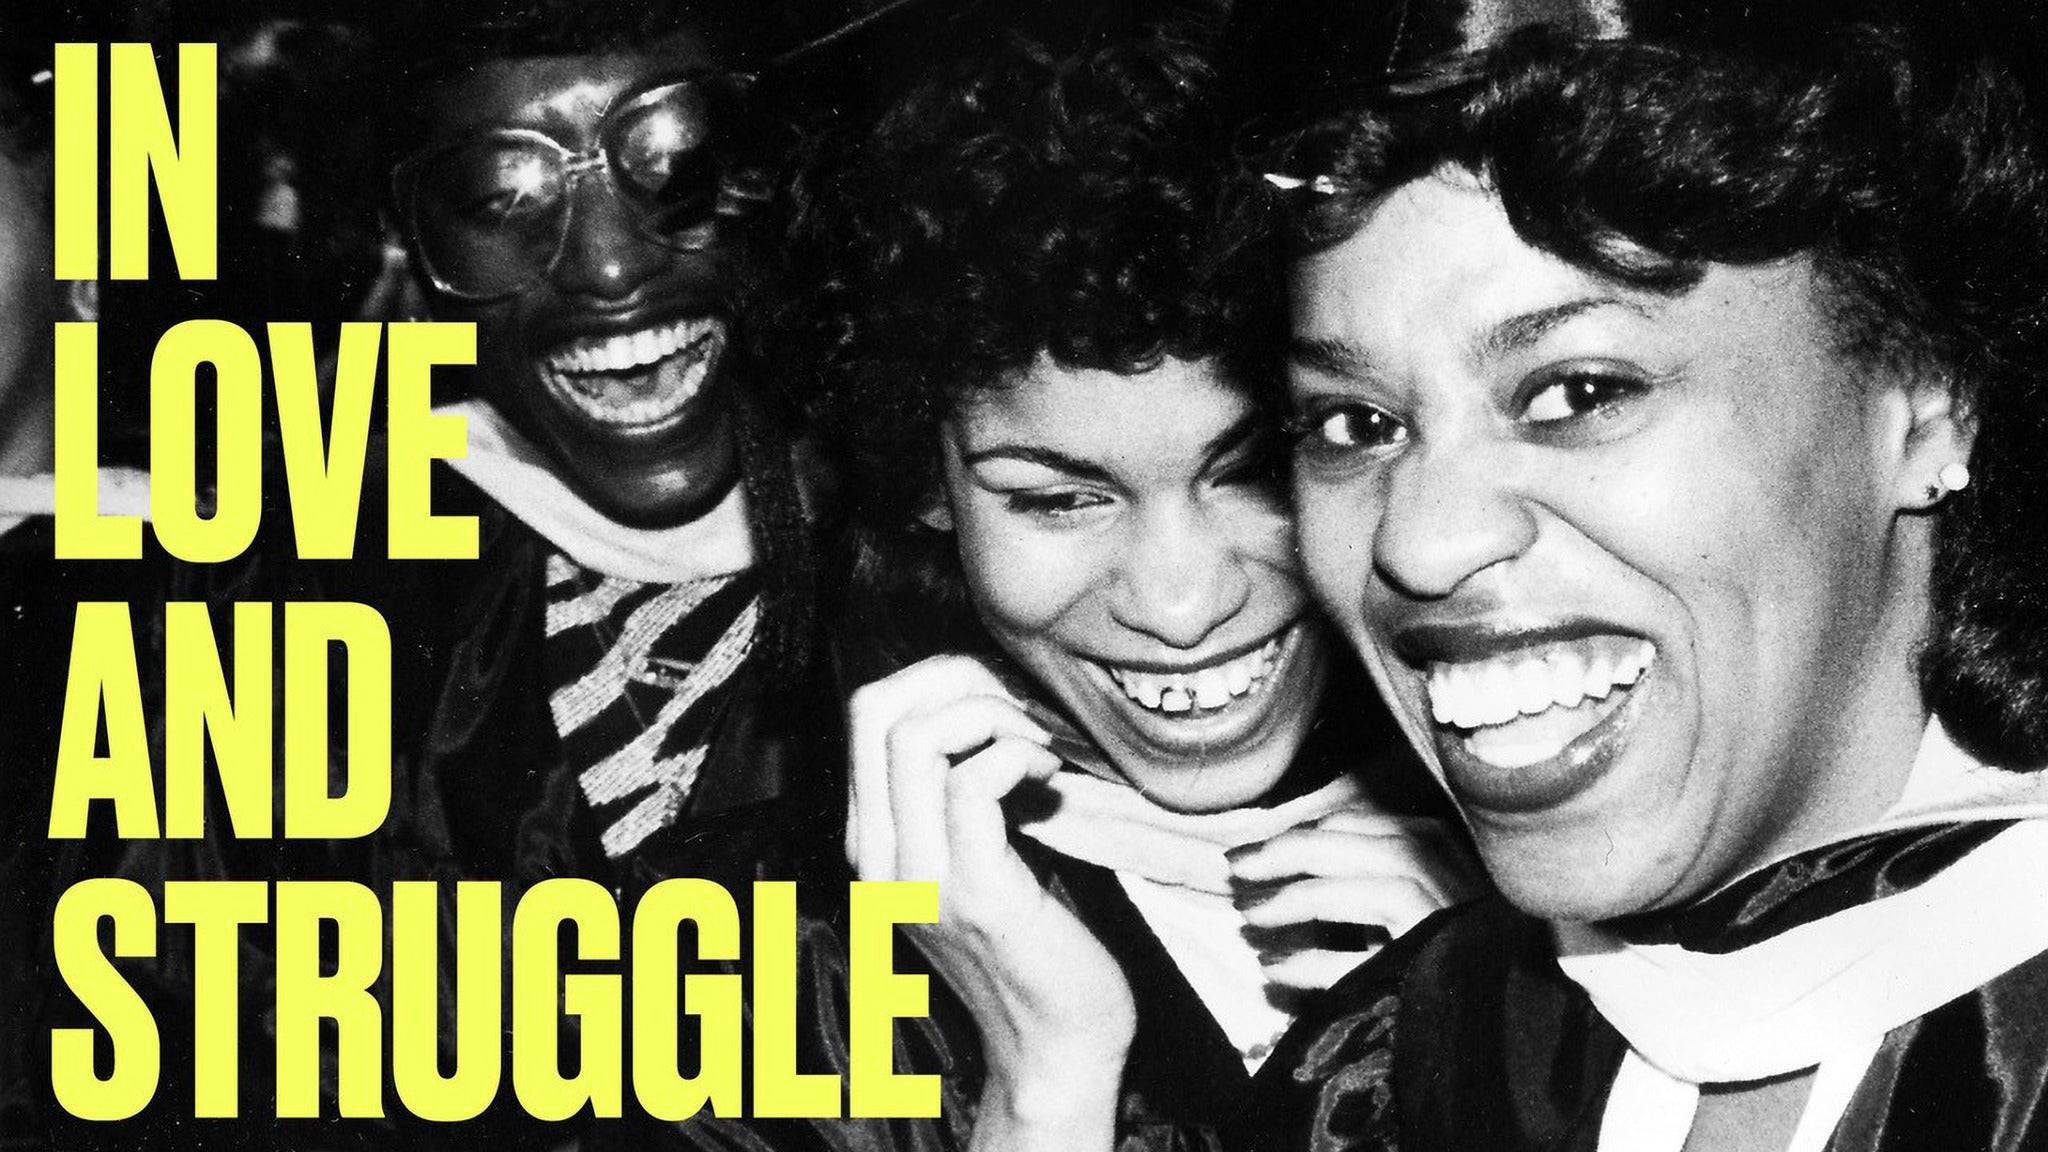 Audible Theater presents In Love and Struggle (NY) presale information on freepresalepasswords.com